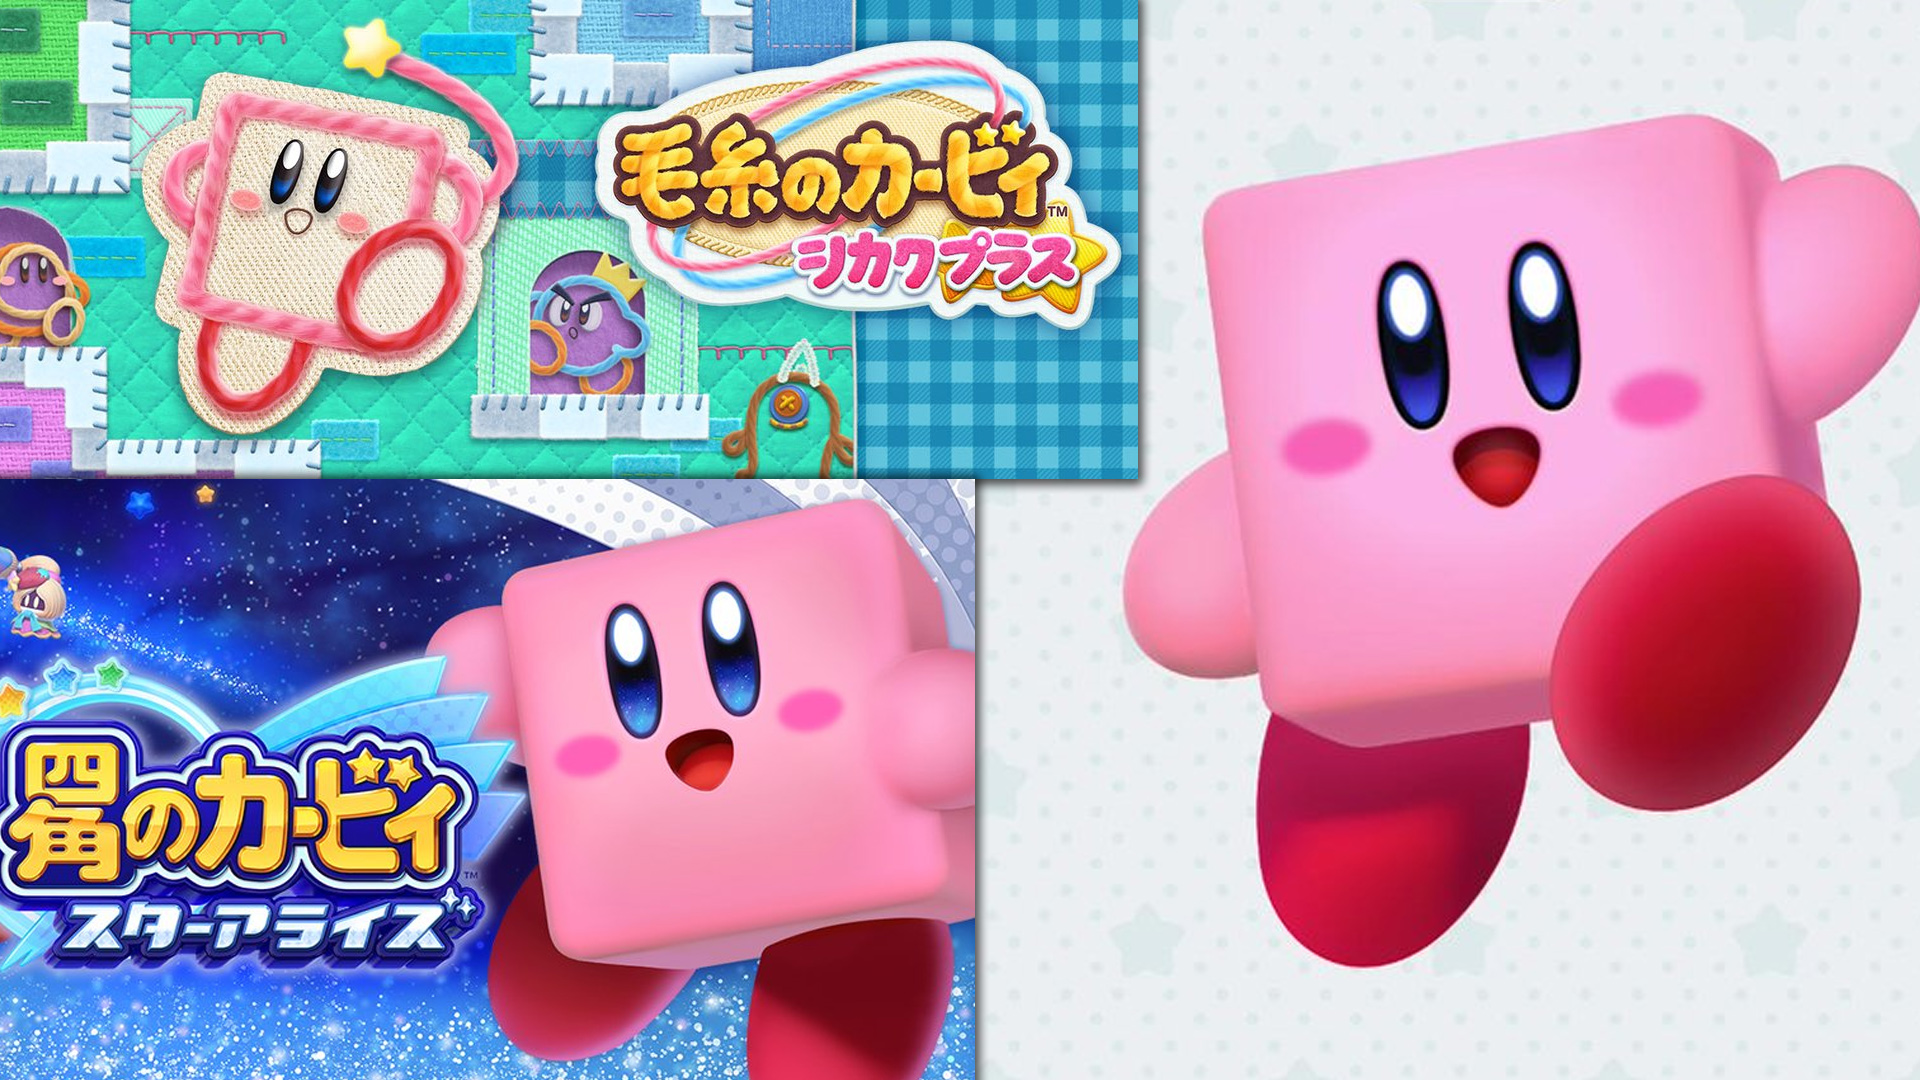 Kirby becomes cuboid for April Fools | Nintendo Wire